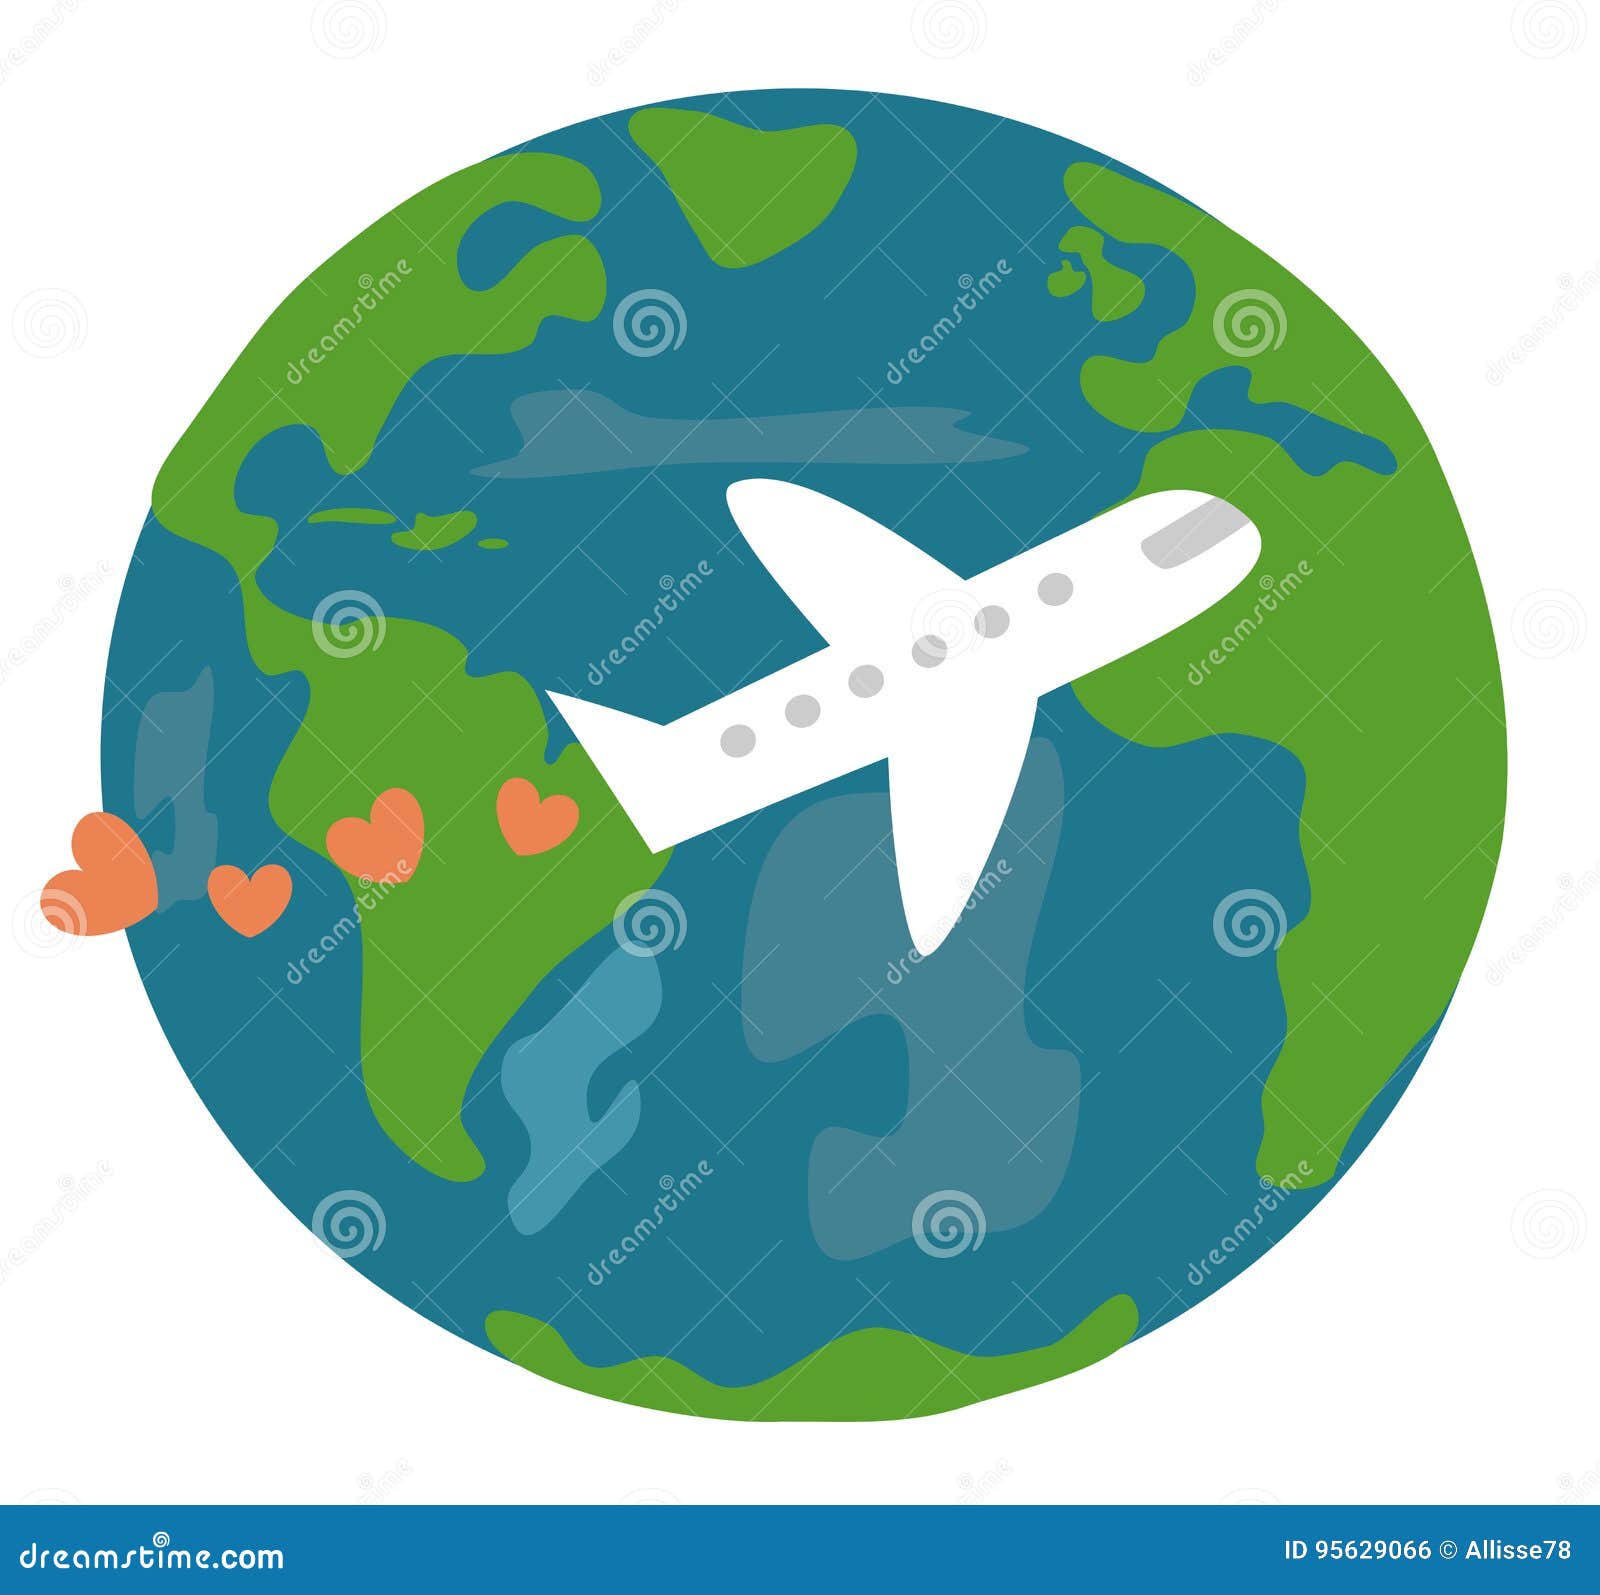 Cute Cartoon Earth and Plane with Hearts Love Travel the World Concept  Vector Illustration Stock Vector - Illustration of happy, tourism: 95629066